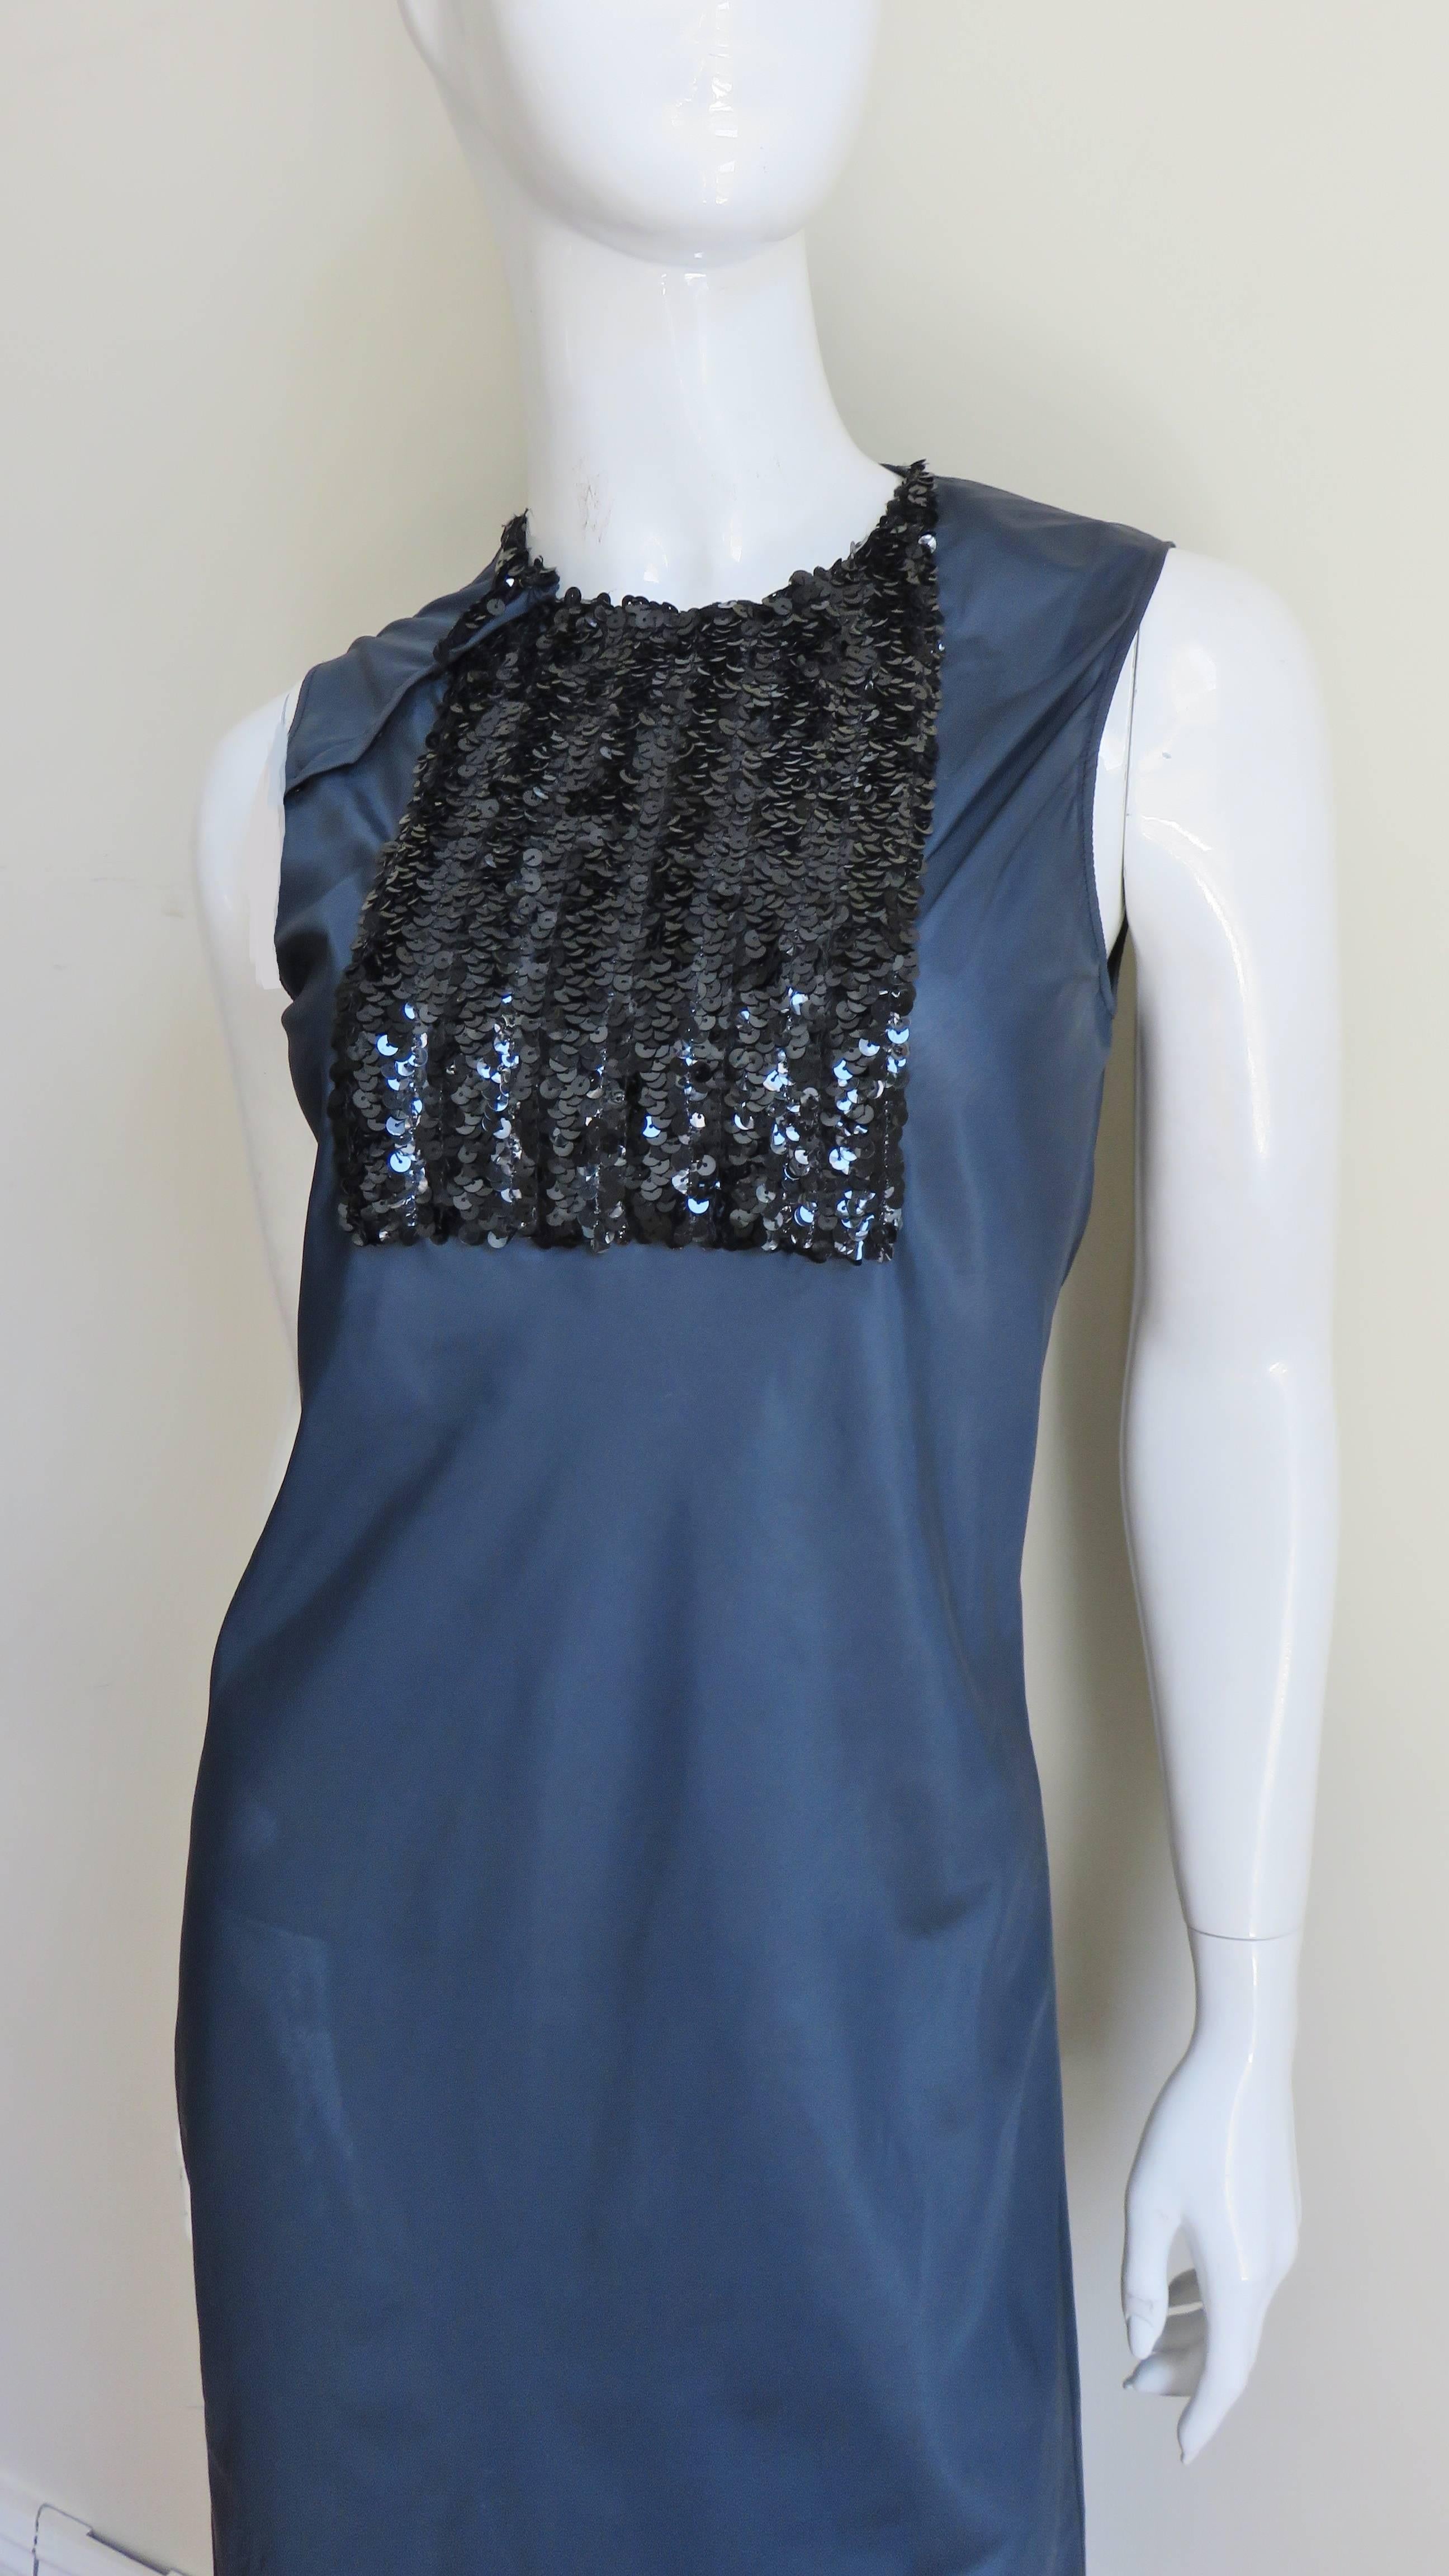 A great navy blue dress by Helmut Lang.  It is a simple crew neck sheath with a square black sequin covered center front panel from neckline to bust.  It is unlined and has snaps closurebat the shoulder seam.
Fits size Small.

Bust  34